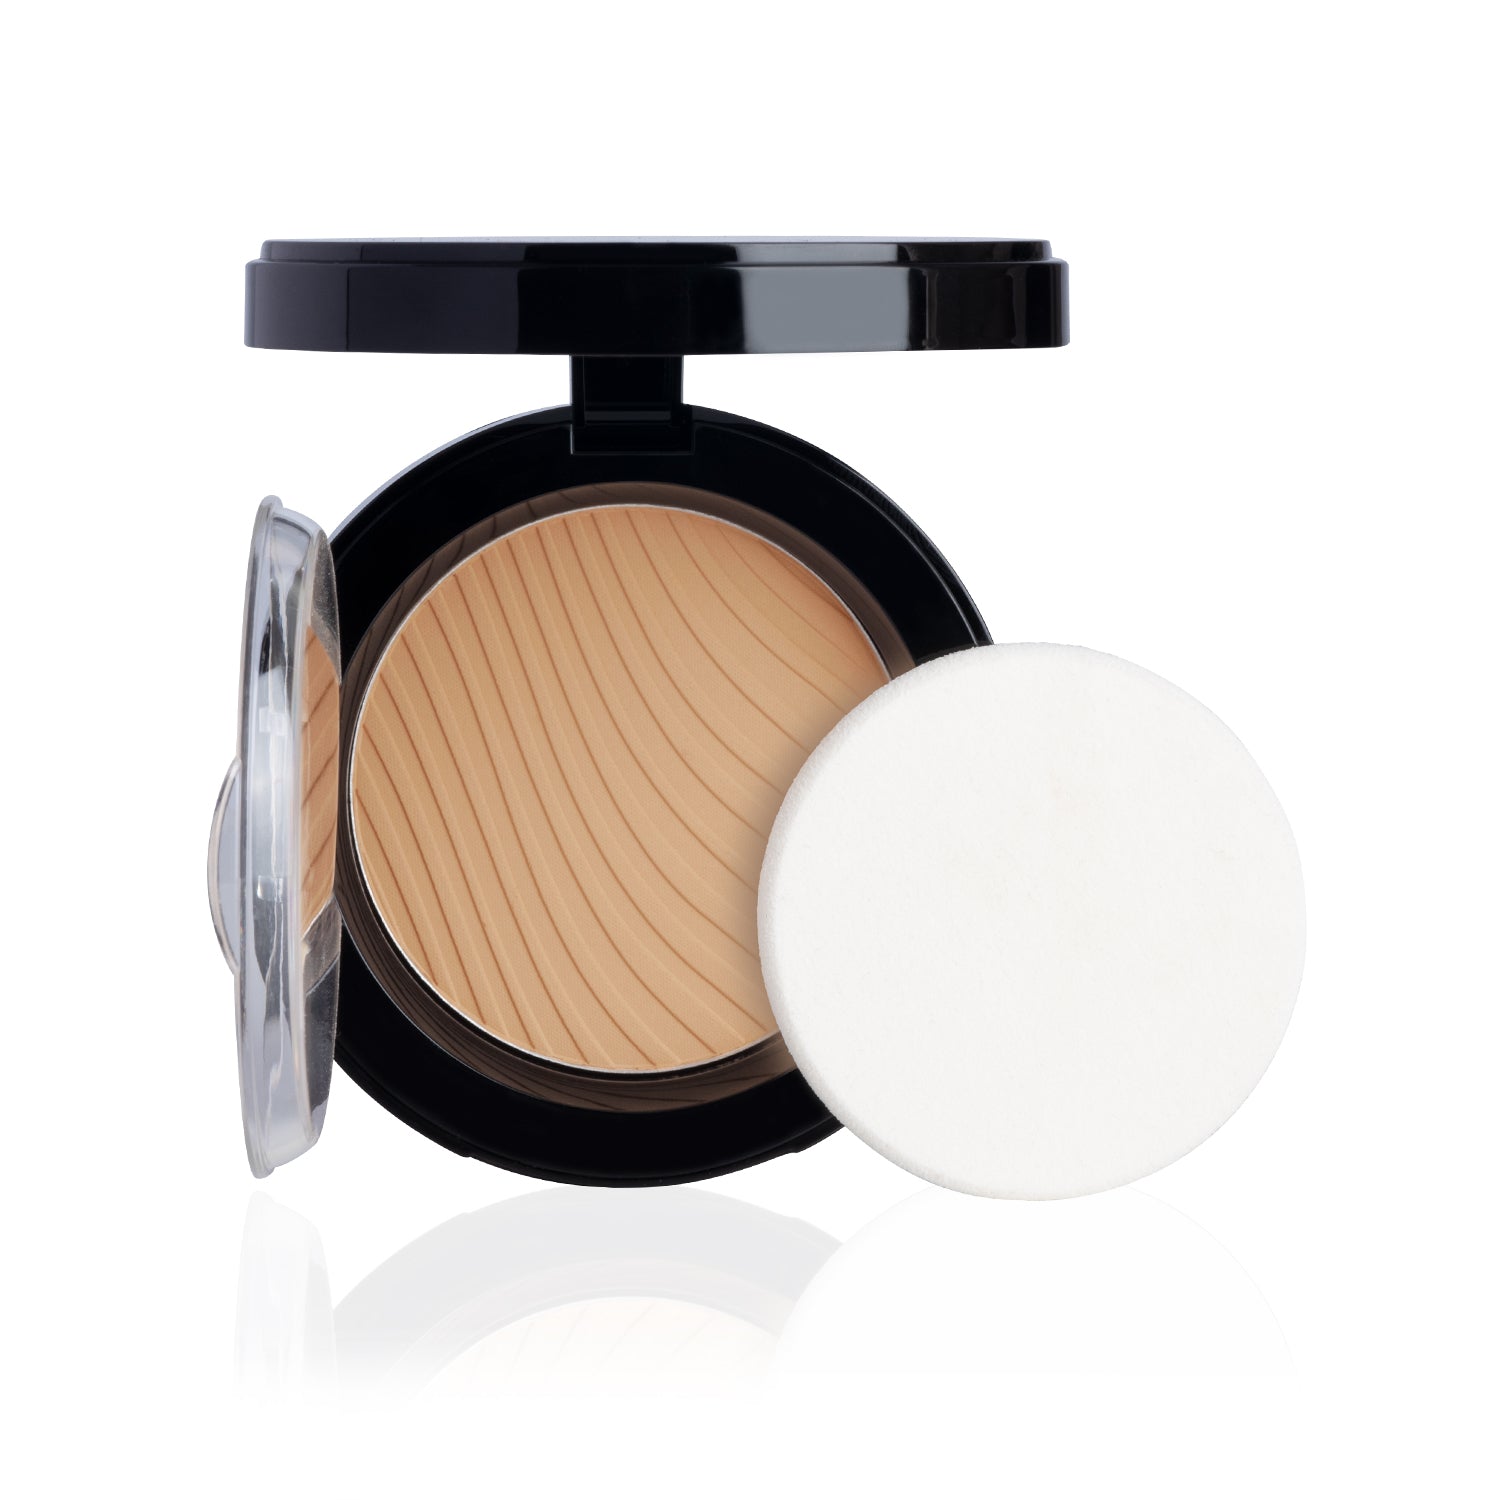 PAC Cosmetics Take Cover Compact Powder (7.85 gm) #Color_Chocology